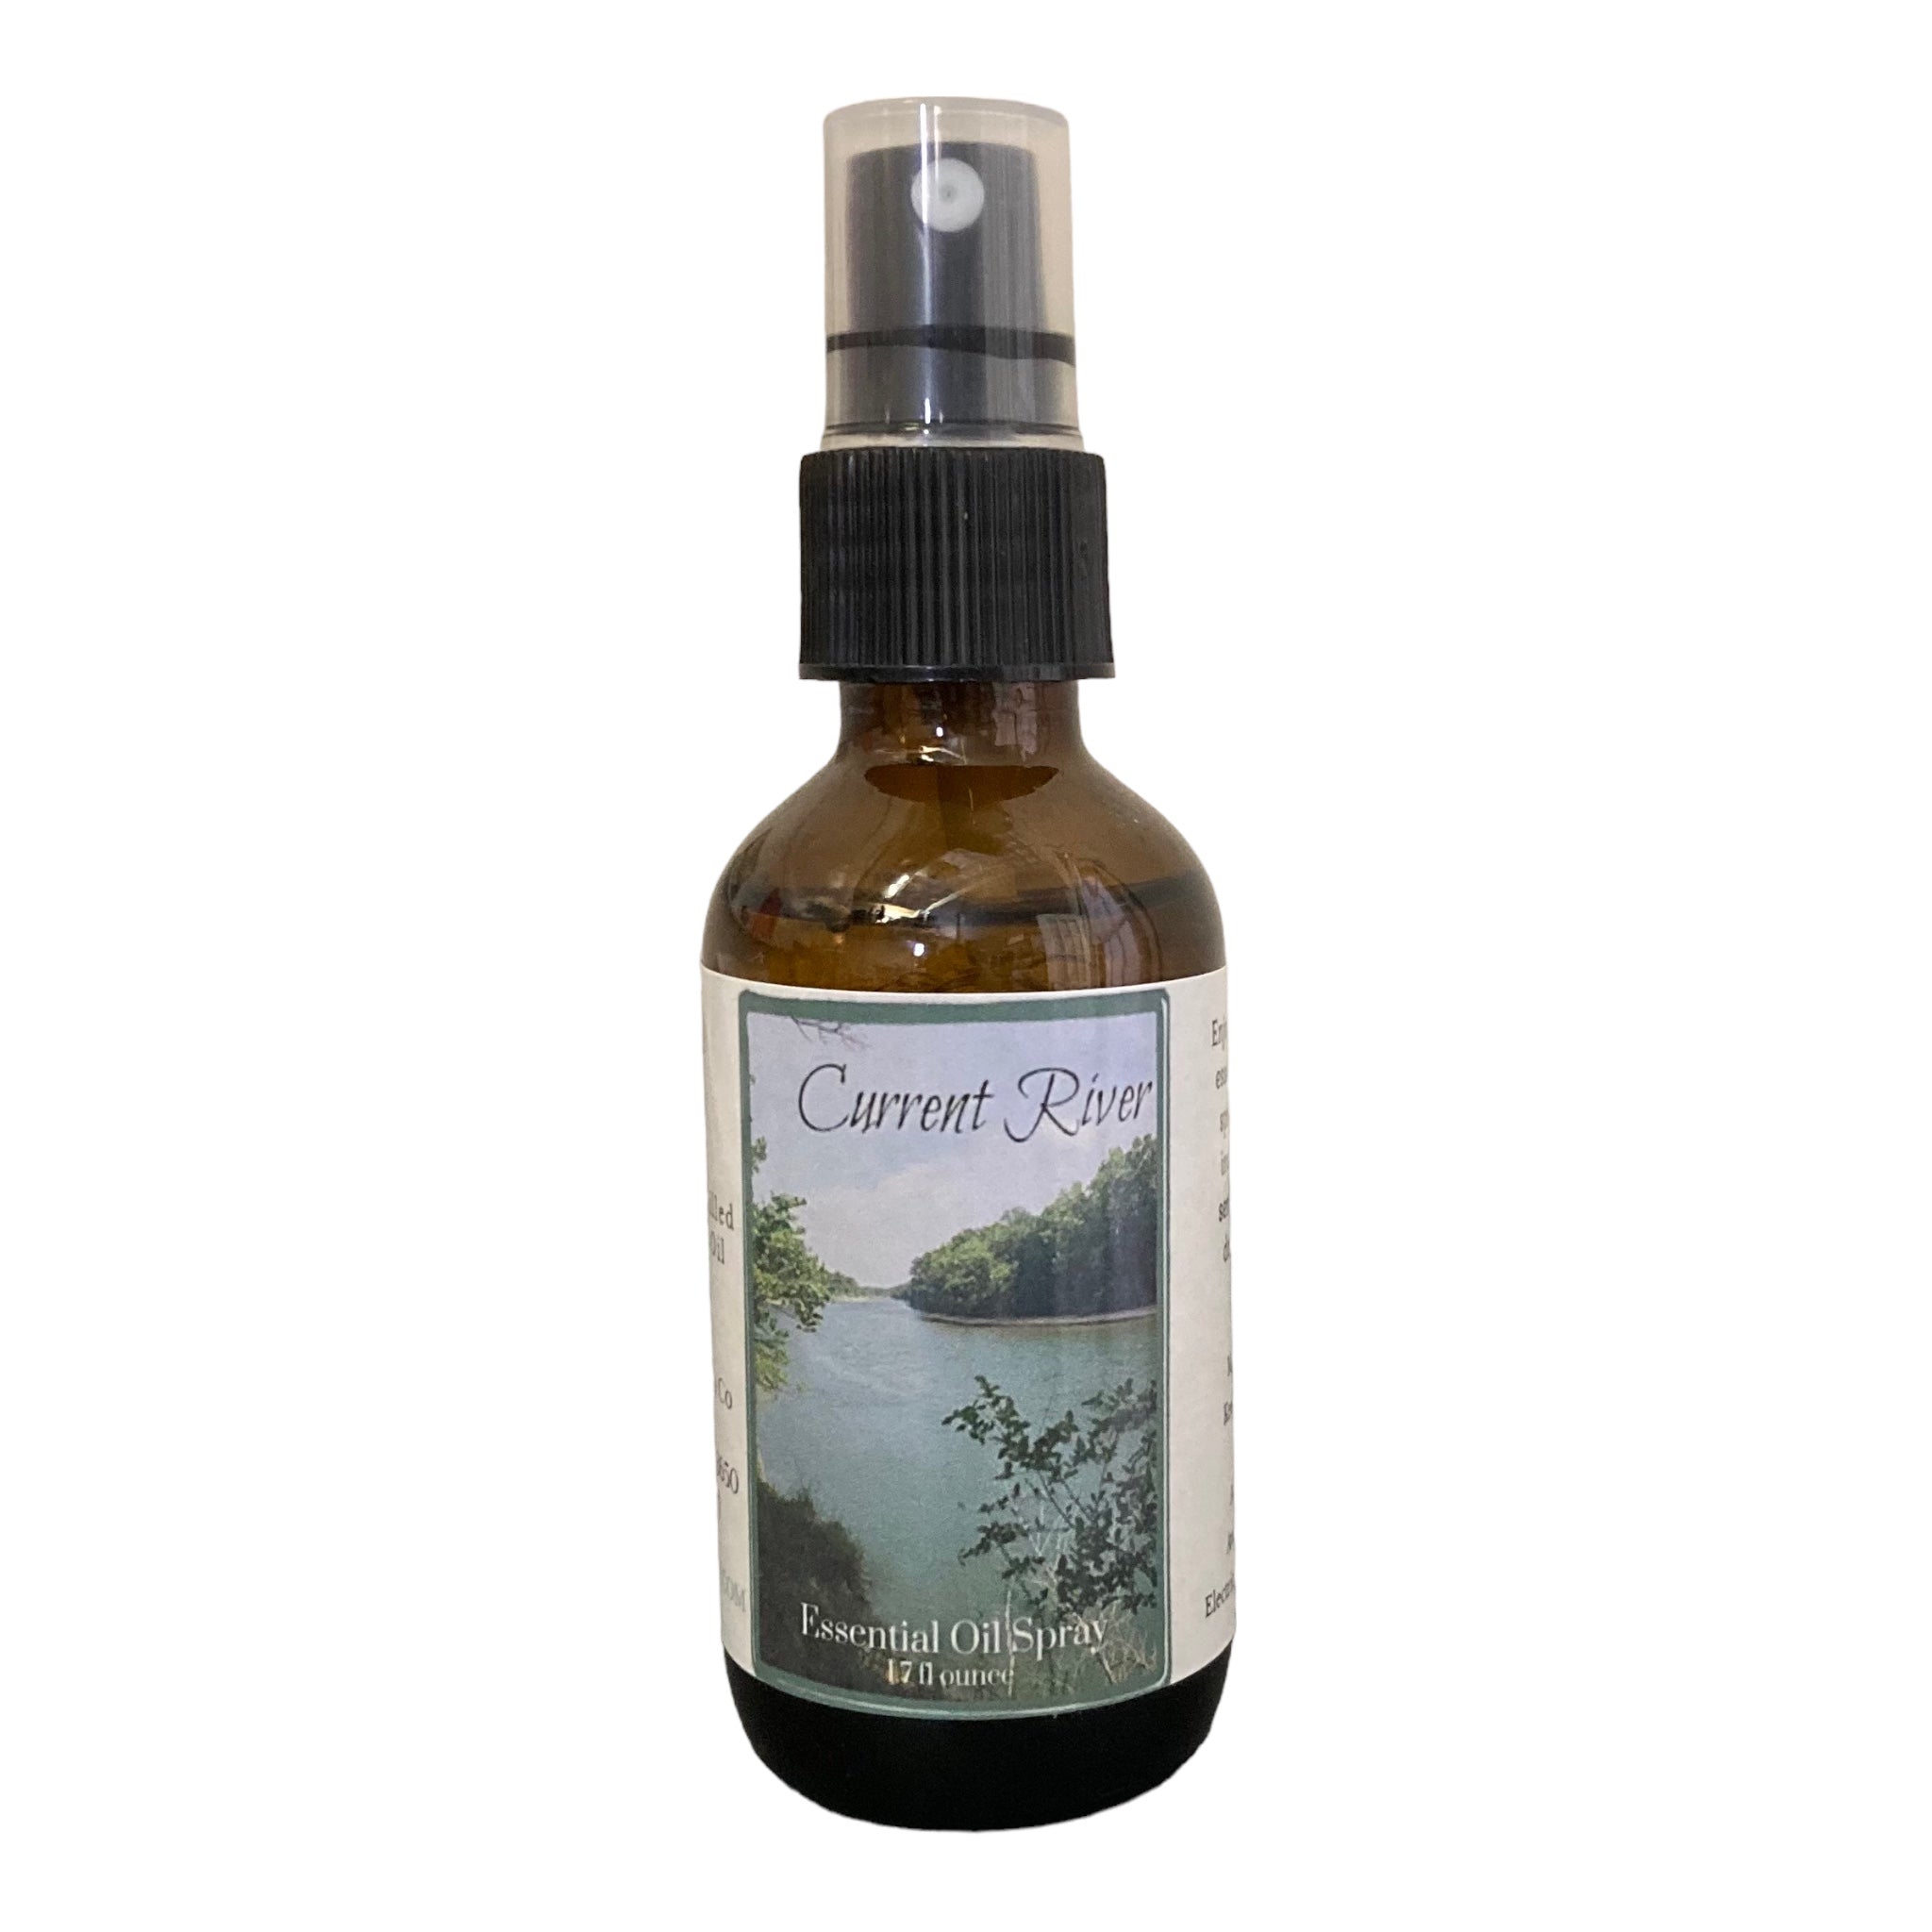 Current River Essential Oil Spray